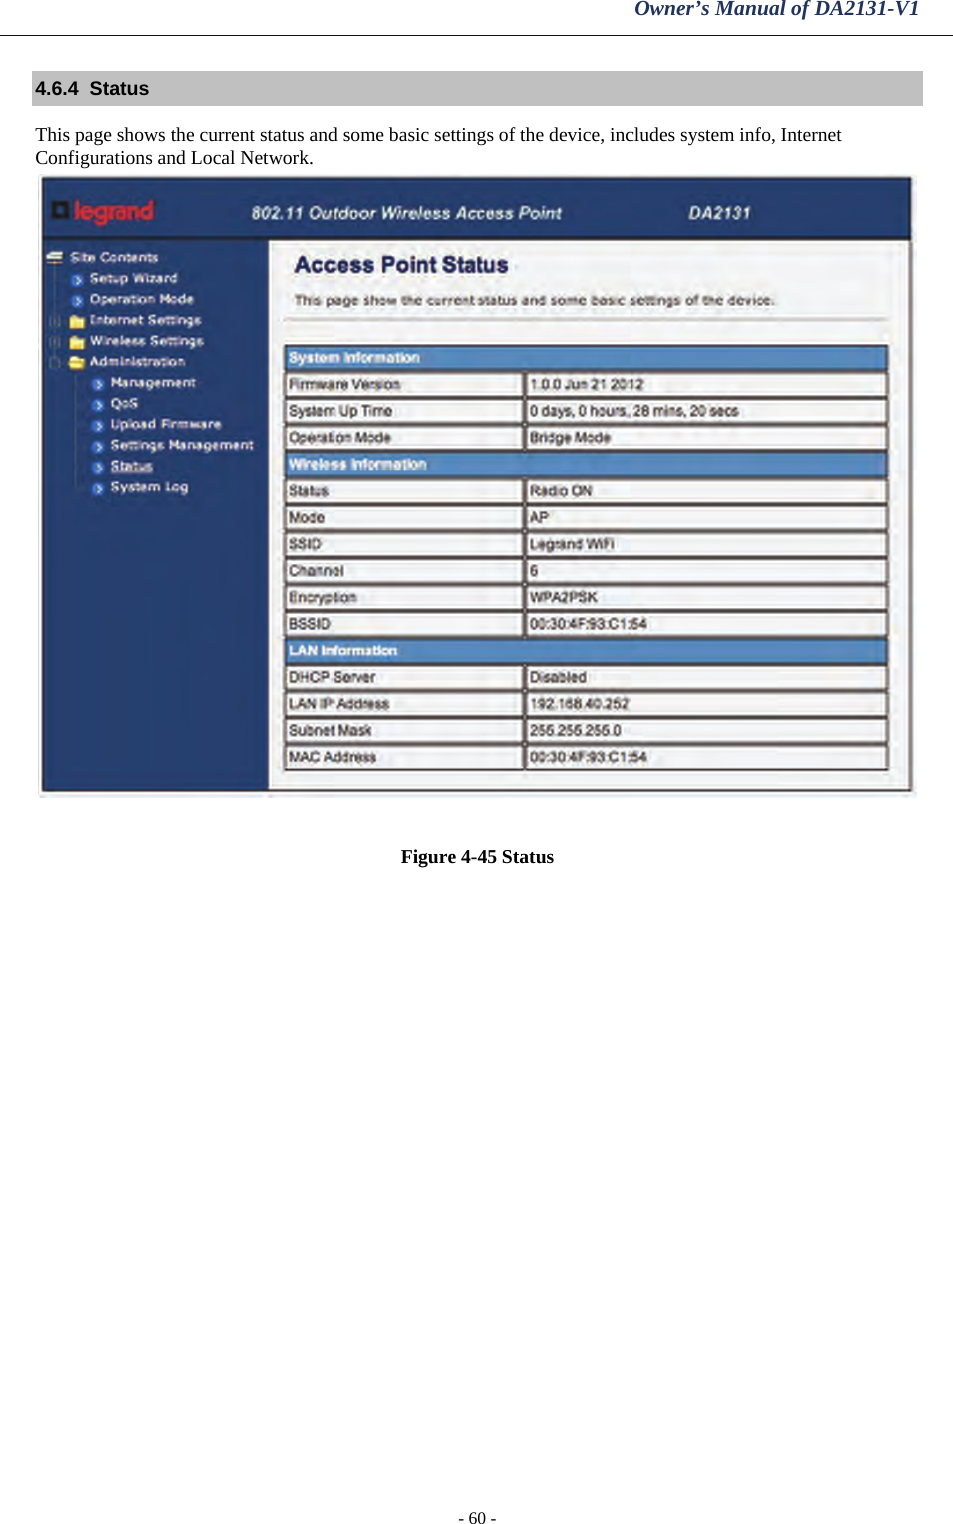 Owner’s Manual of DA2131-V1 - 60 - 4.6.4  Status This page shows the current status and some basic settings of the device, includes system info, Internet Configurations and Local Network.   Figure 4-45 Status  